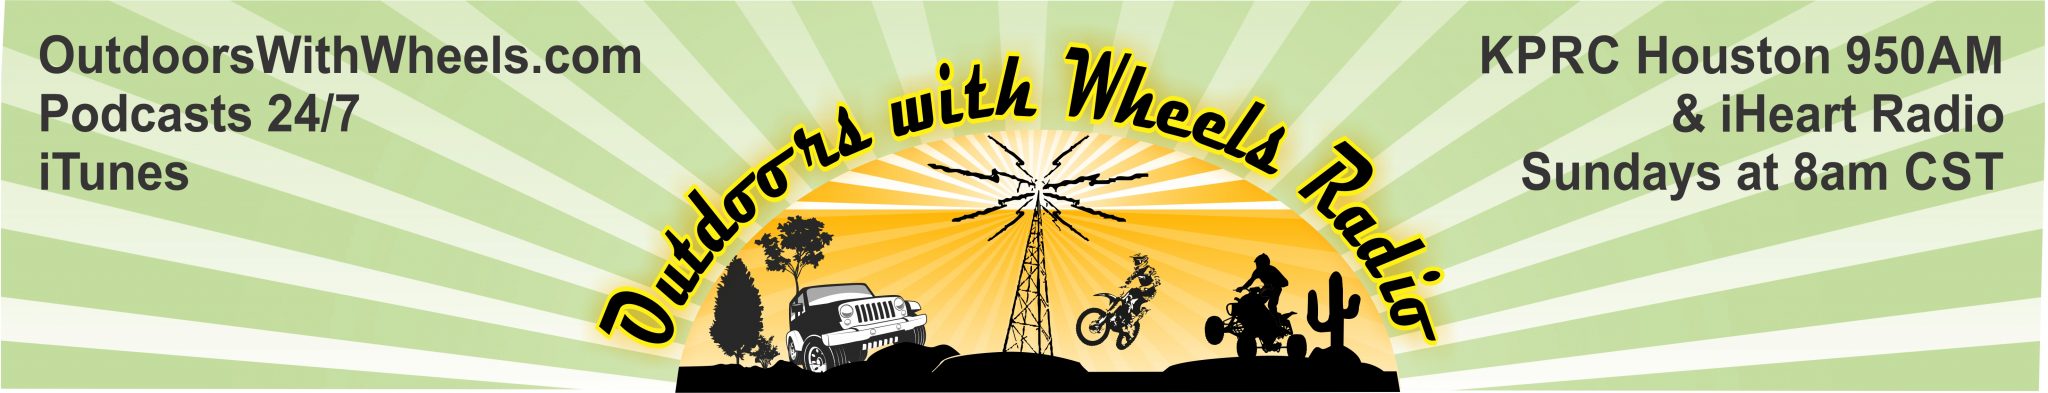 Wheeled Outdoor Adventure Sports Podcasts